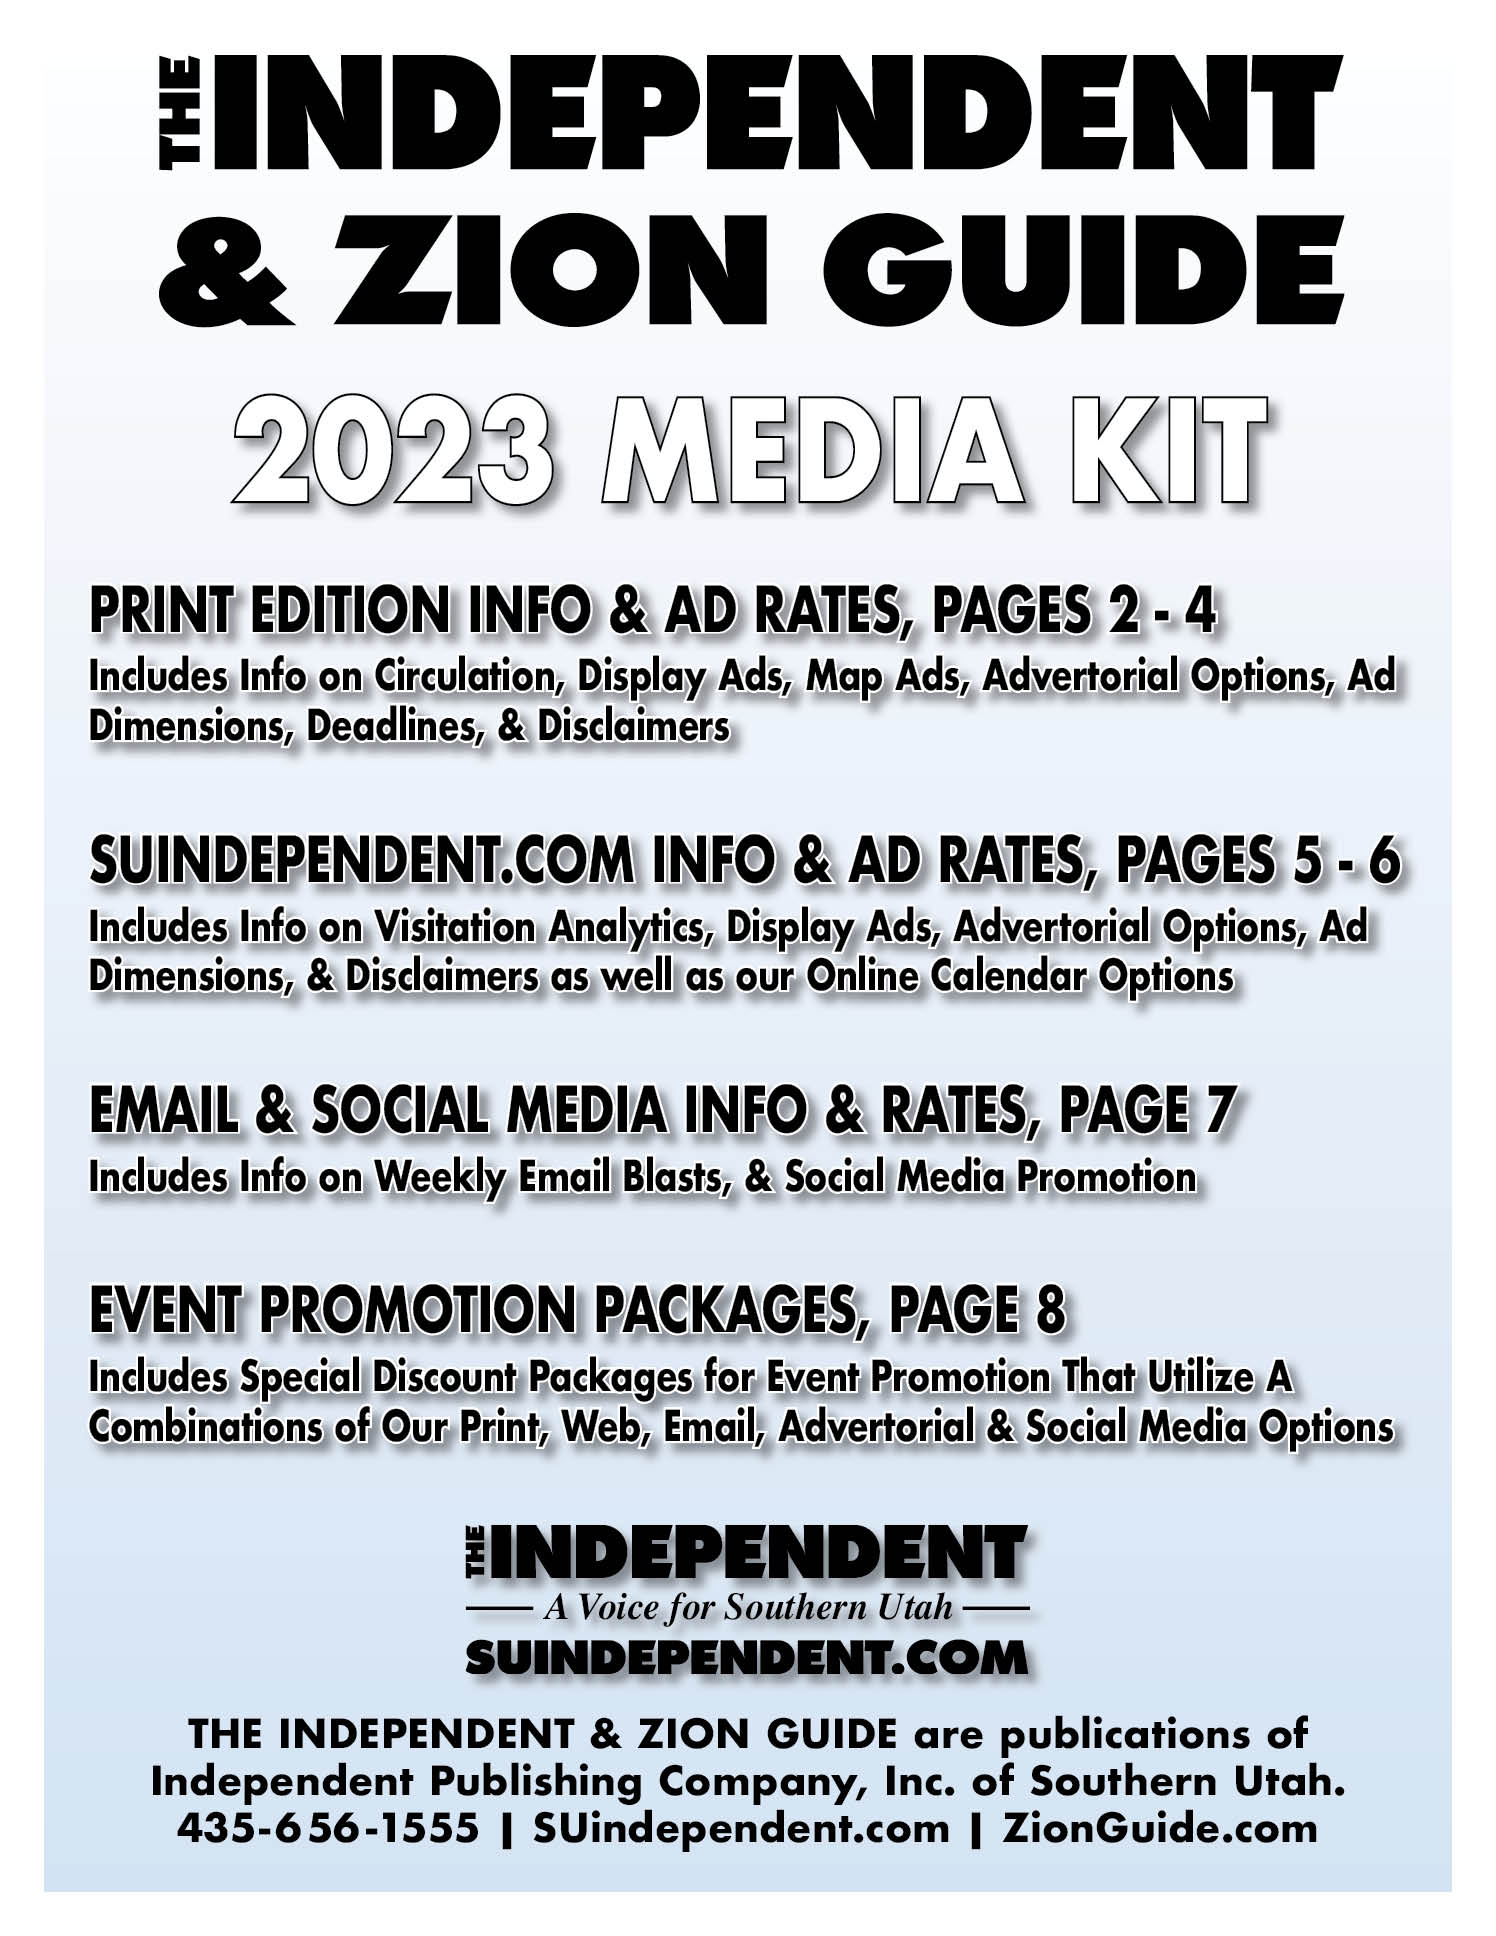 2023 The Independent Zion Guide Media Kit and Advertising Rates page 1